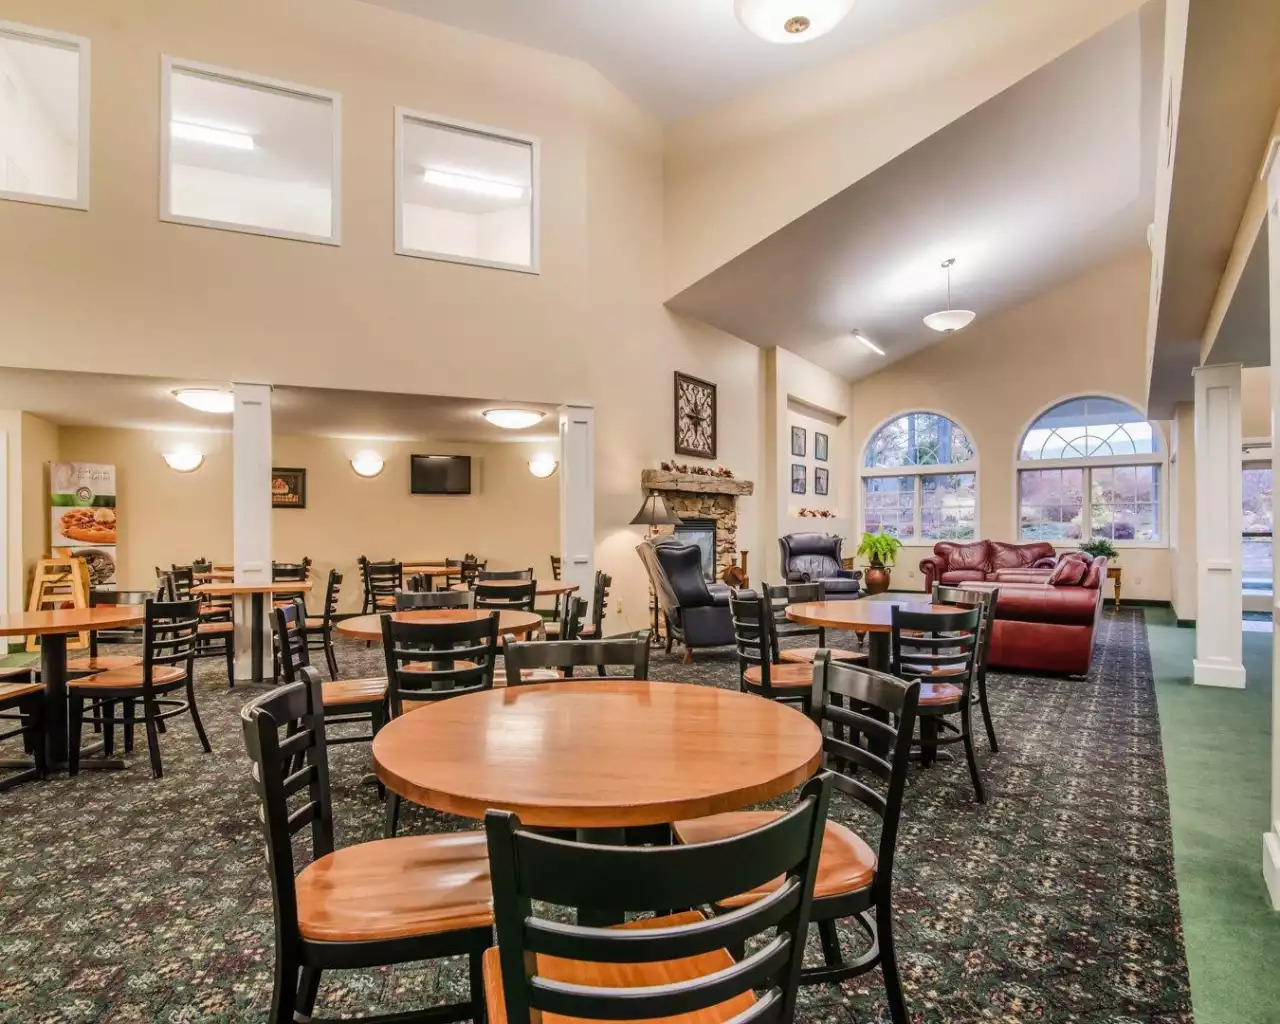 Quality Inn at Quechee Gorge - Breakfast Area and Main Lobby